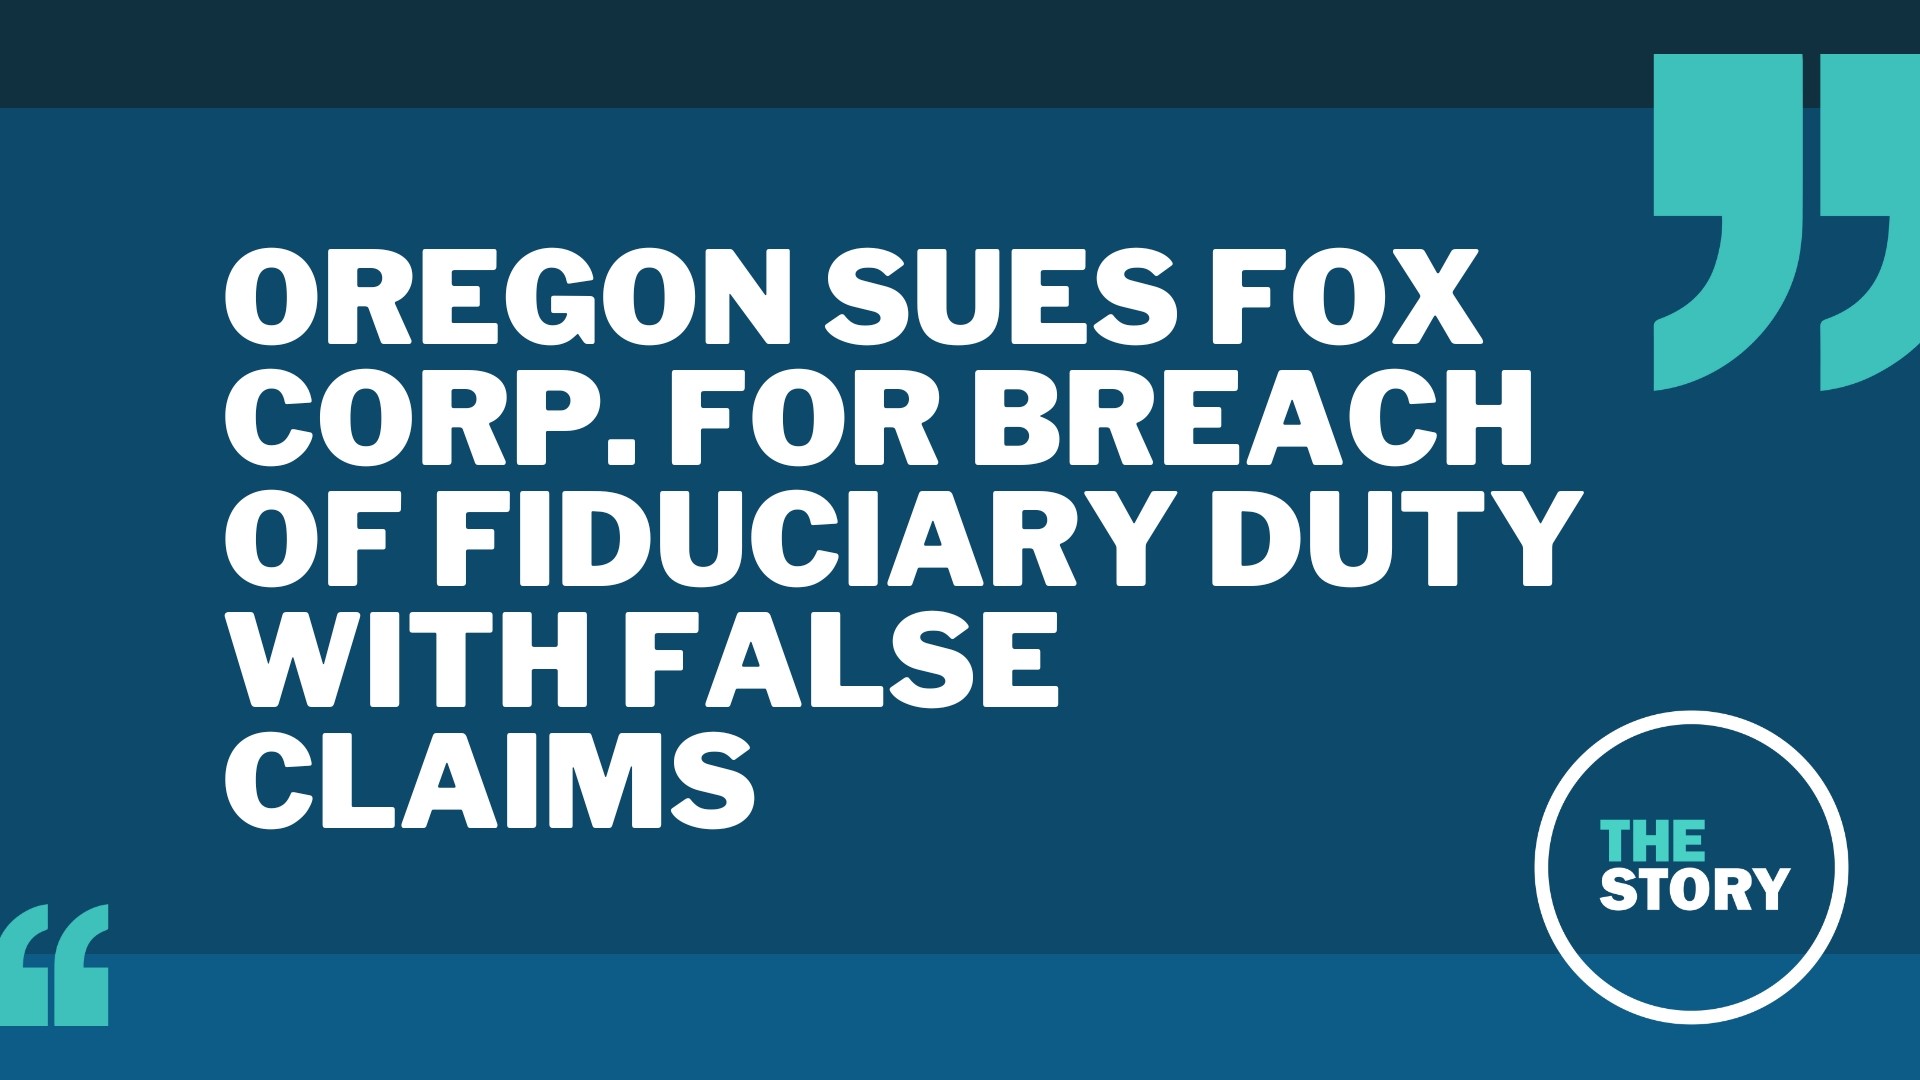 In June, Oregon Treasurer Tobias Read said that the state had just under $12 million invested in FOX. By the end of August, the state had $5.2 million.